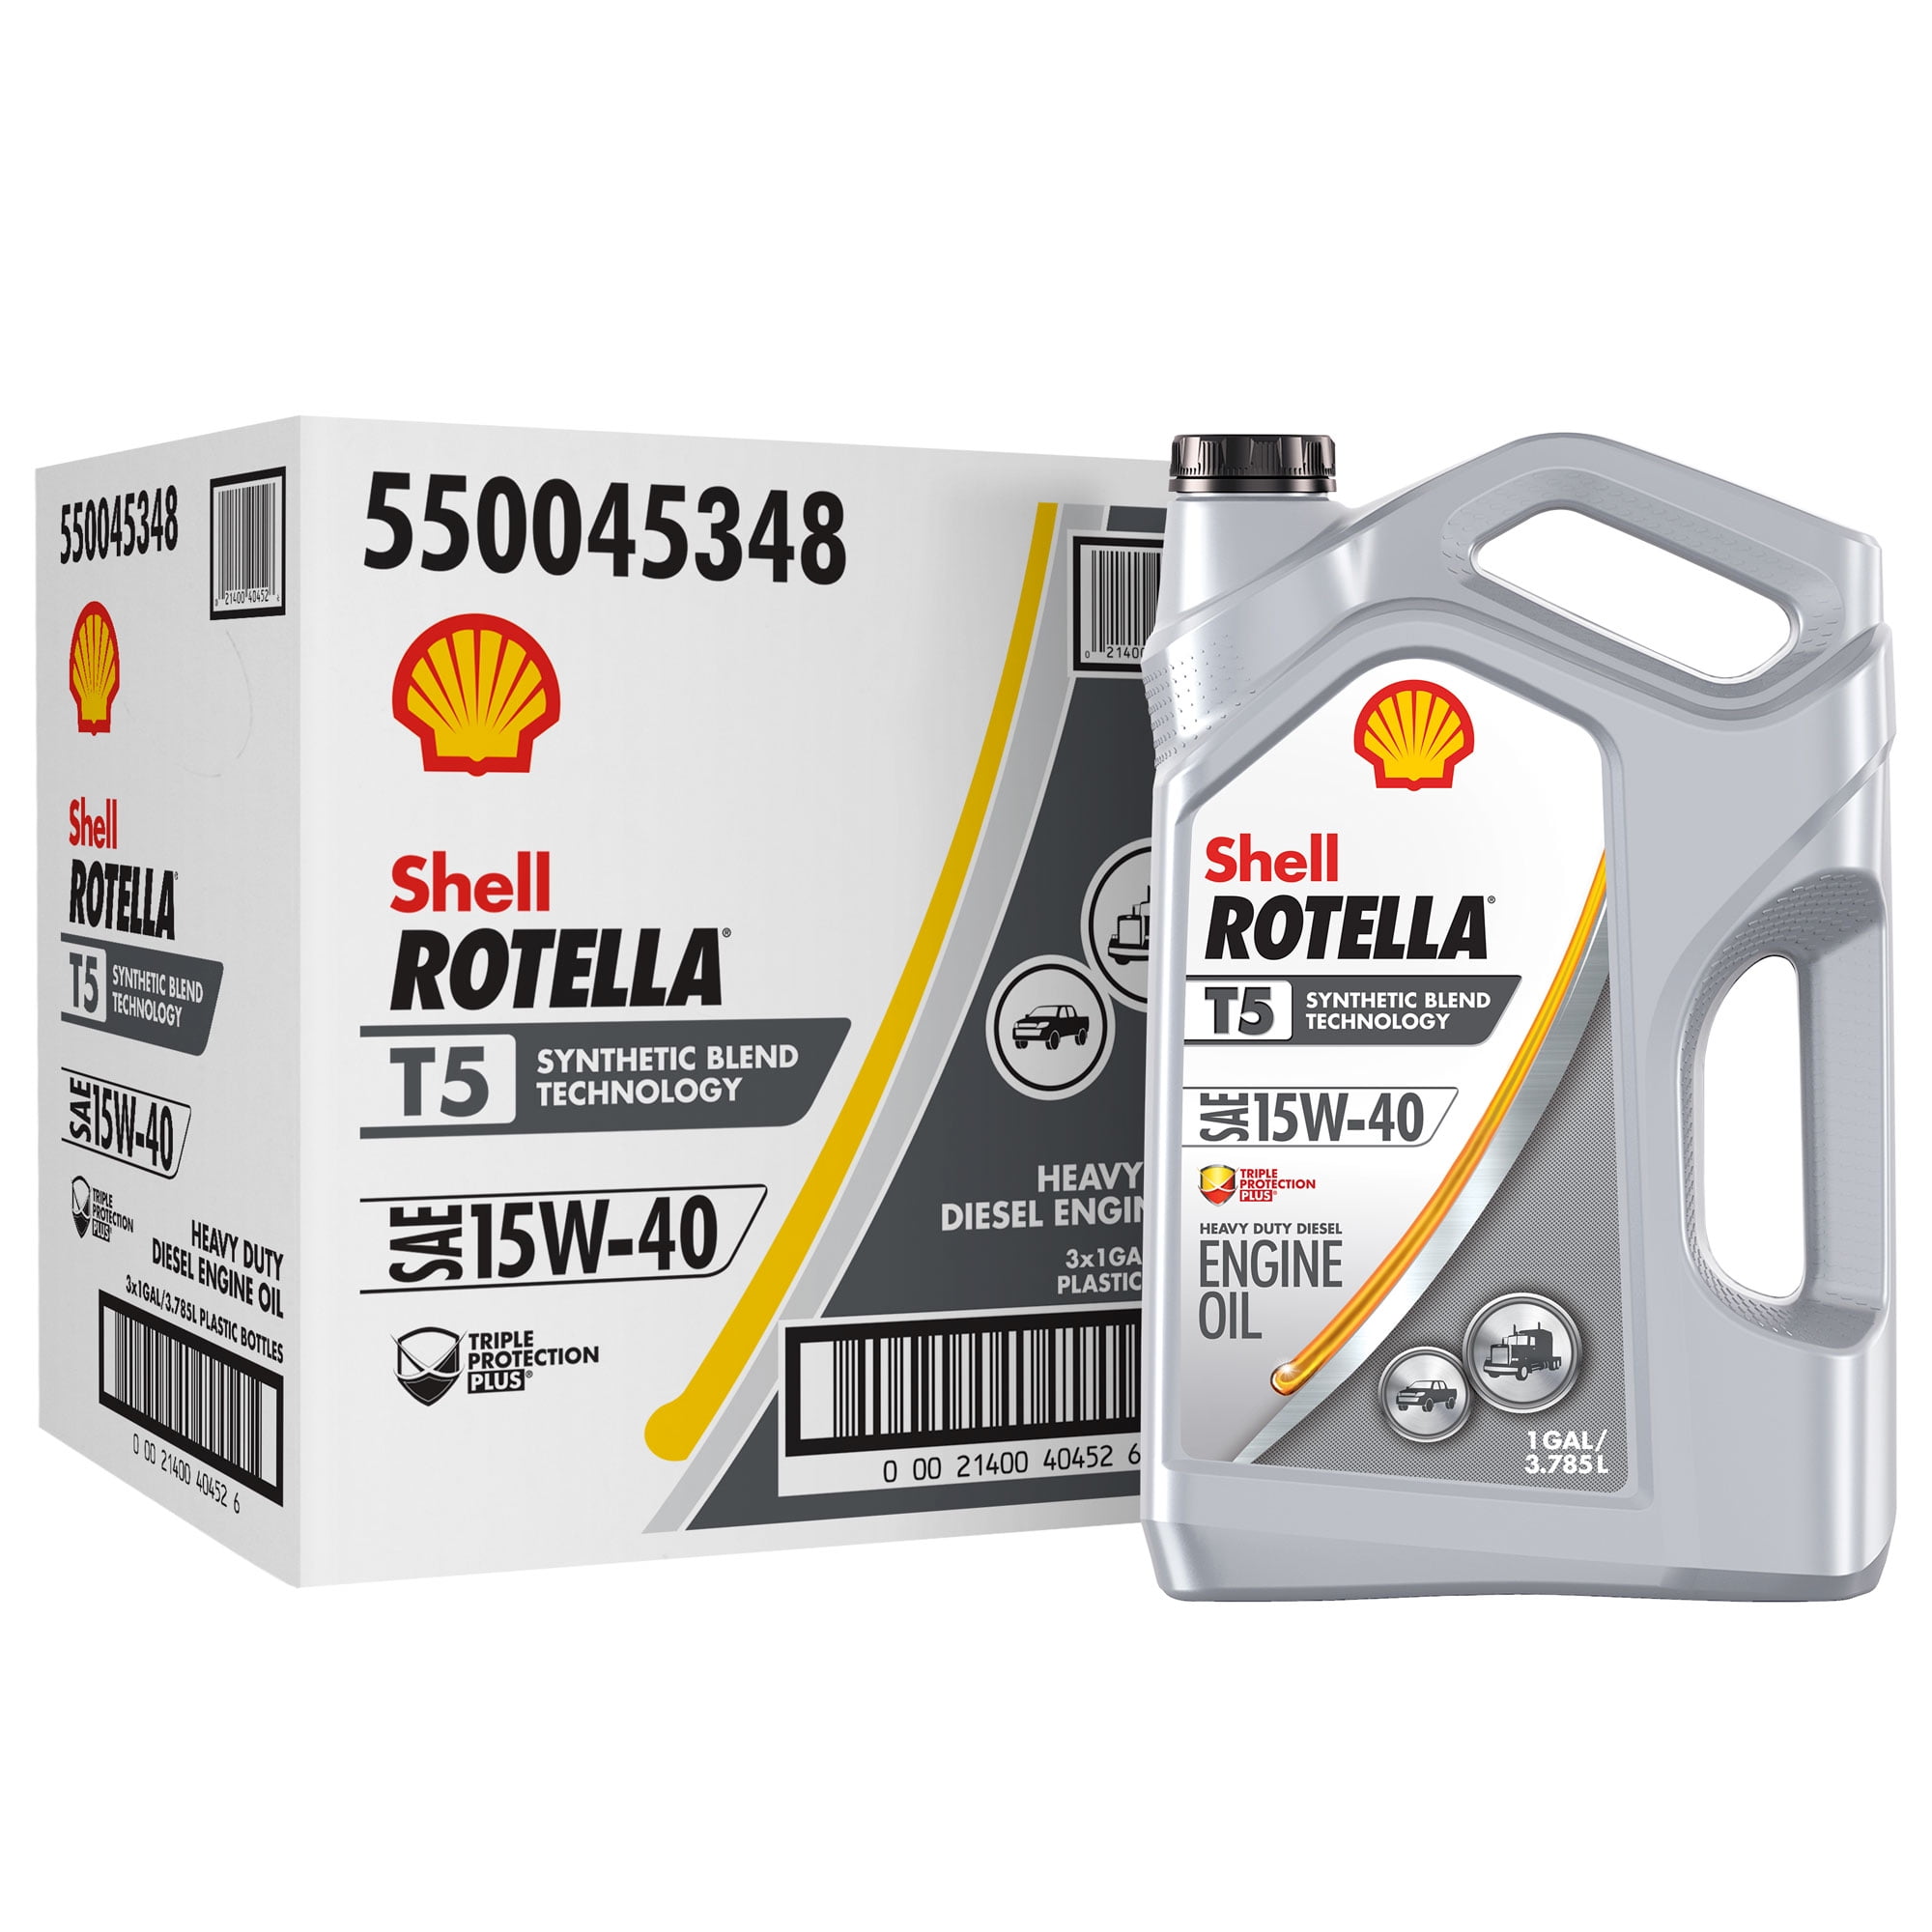 Is Shell Rotella T5 Full Synthetic